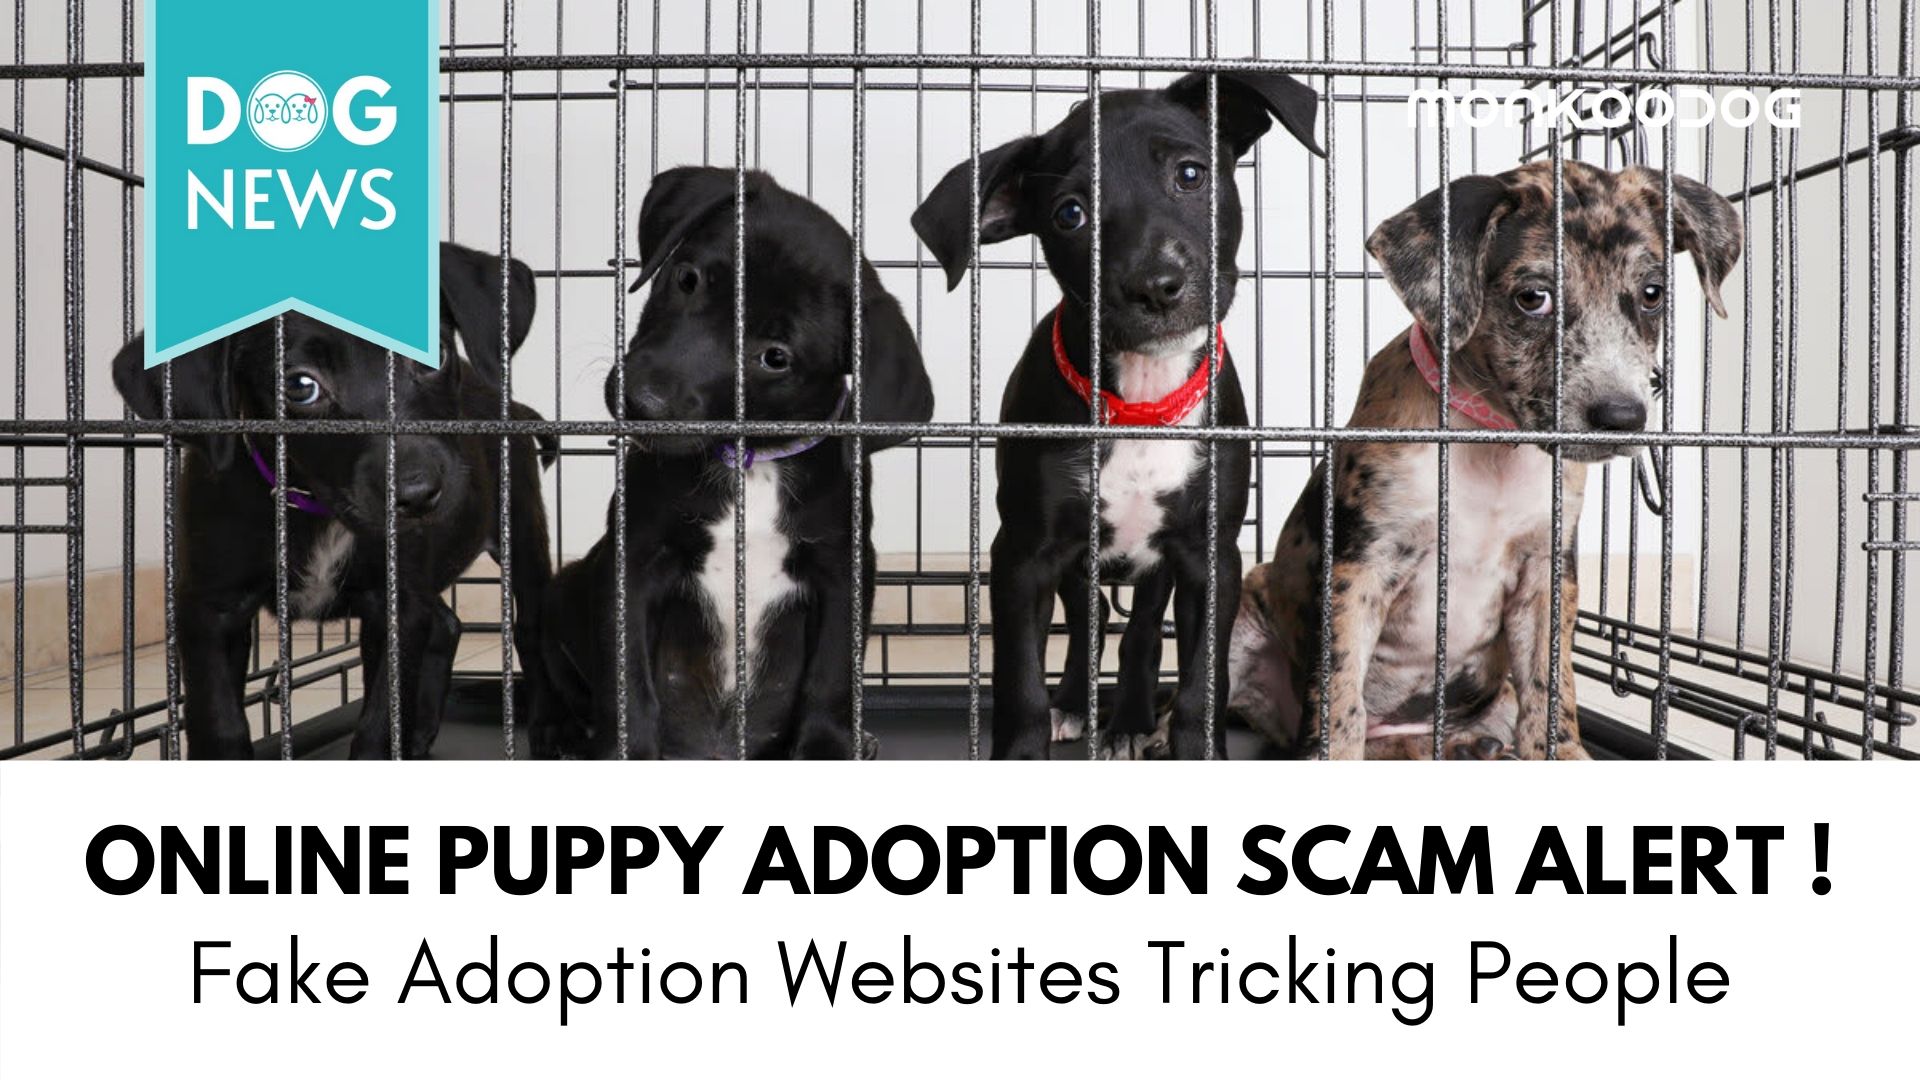 Online Puppy Adoption Scam Growing in the Latest Innovative Crime Style